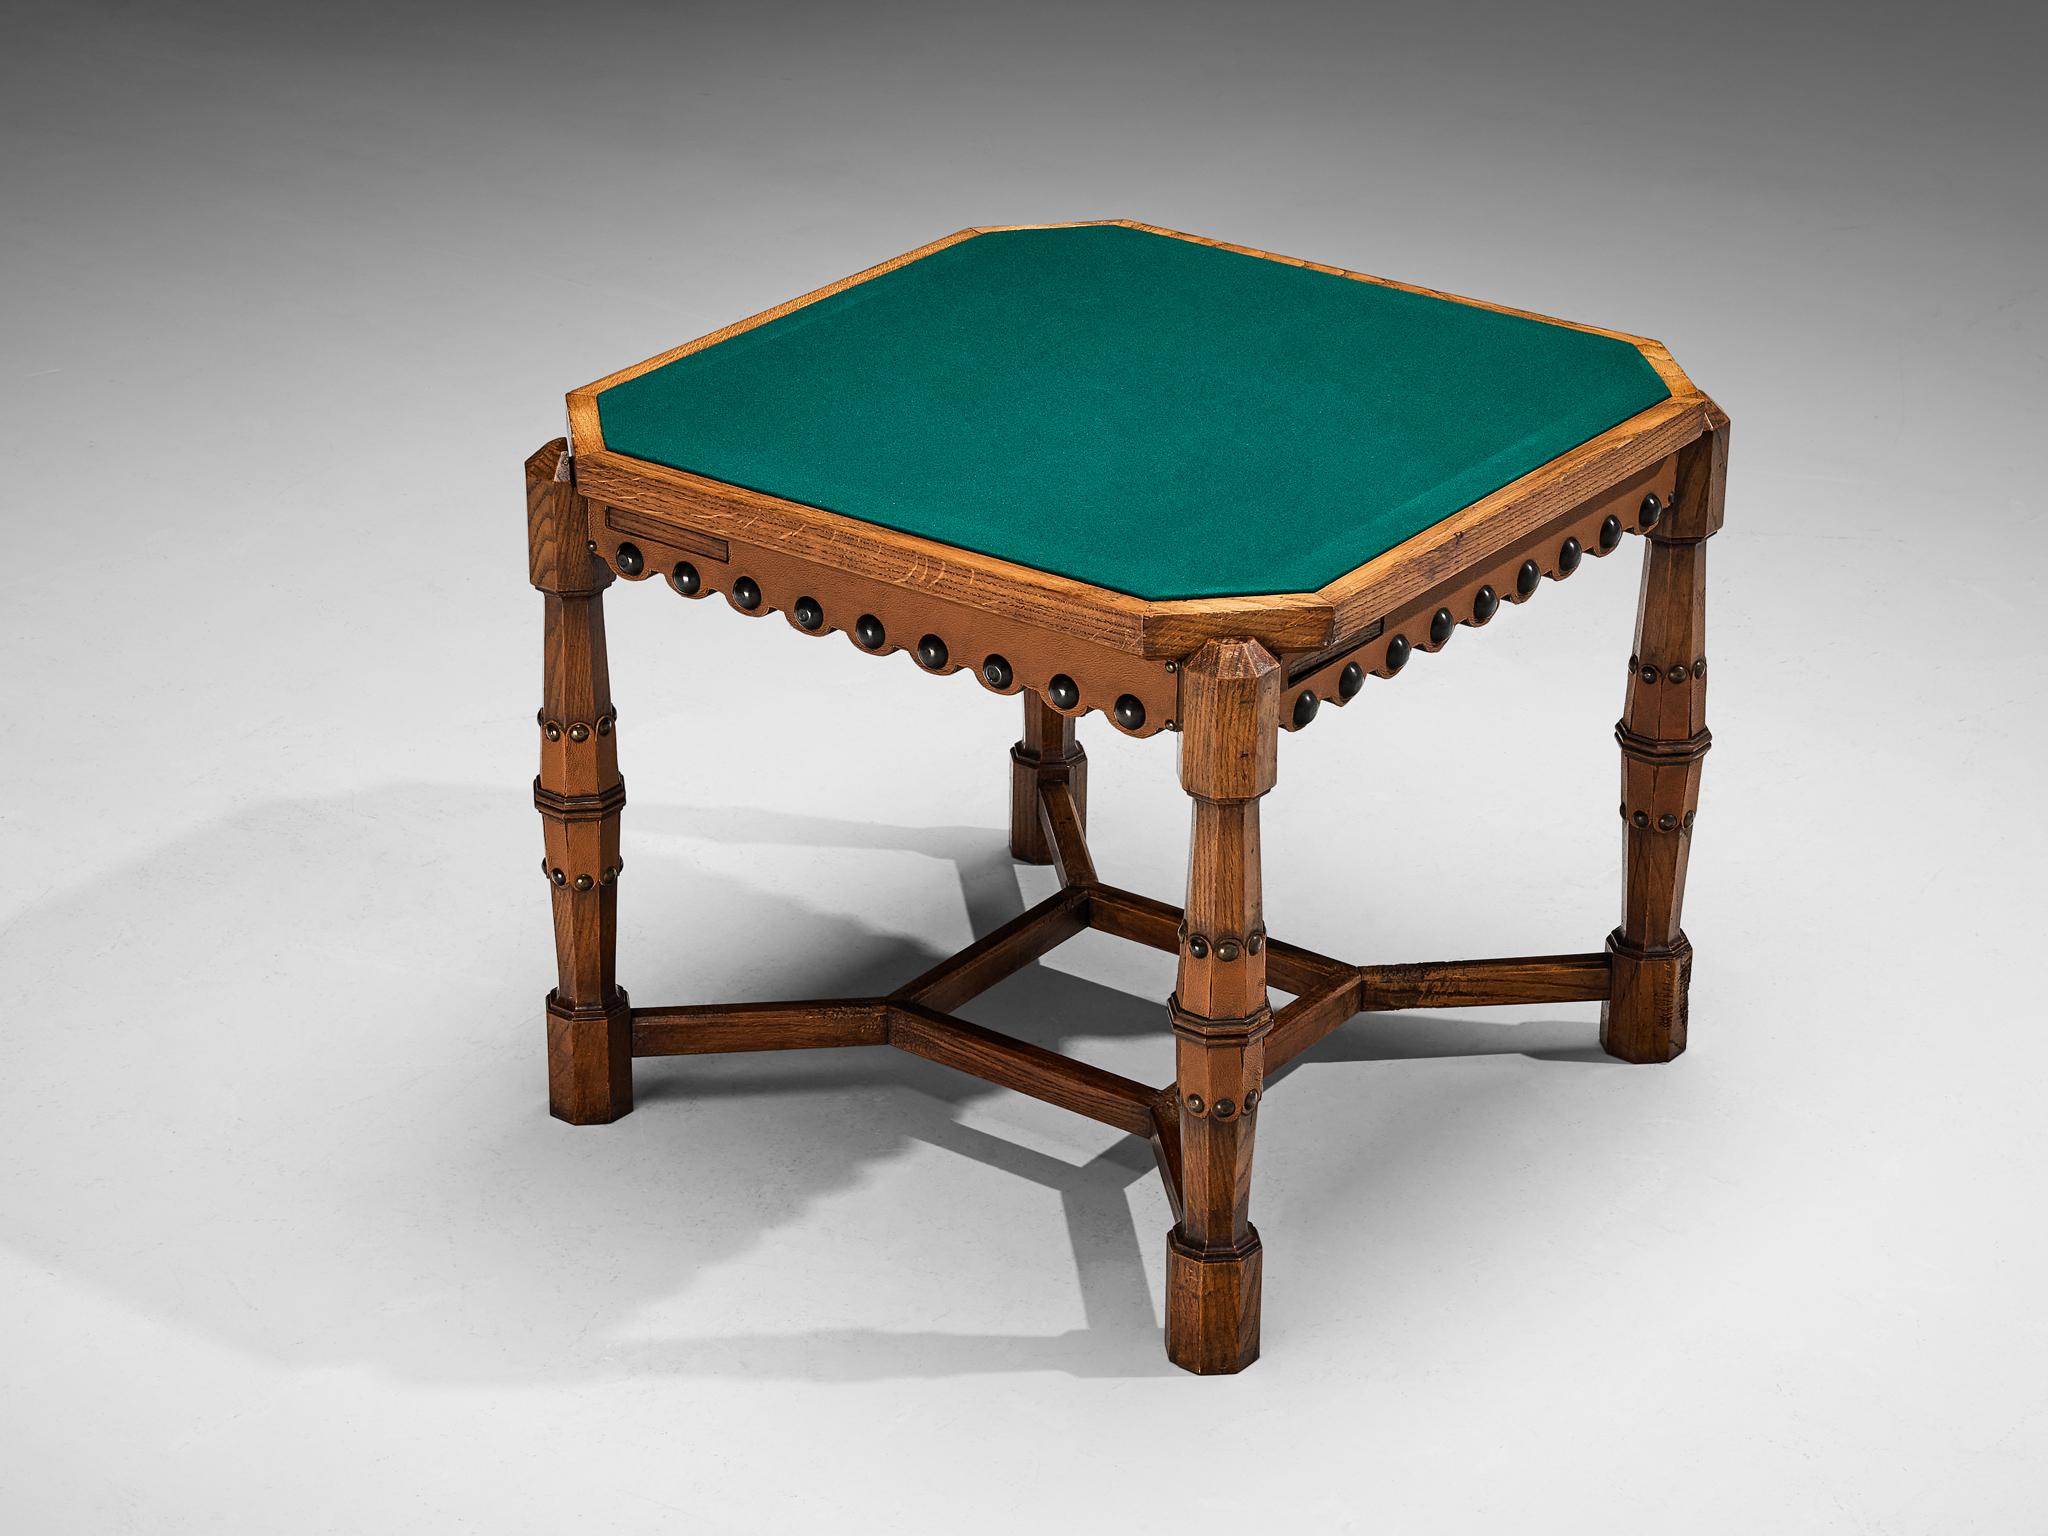 Vittorio Valabrega, oak, leather, brass, felt, aluminum, Italy, 1940s 

This distinctive game table is designed by the craftsman Italian Vittorio Valabrega. Its square top exhibits a captivating marquetry pattern crafted from oak triangles. What